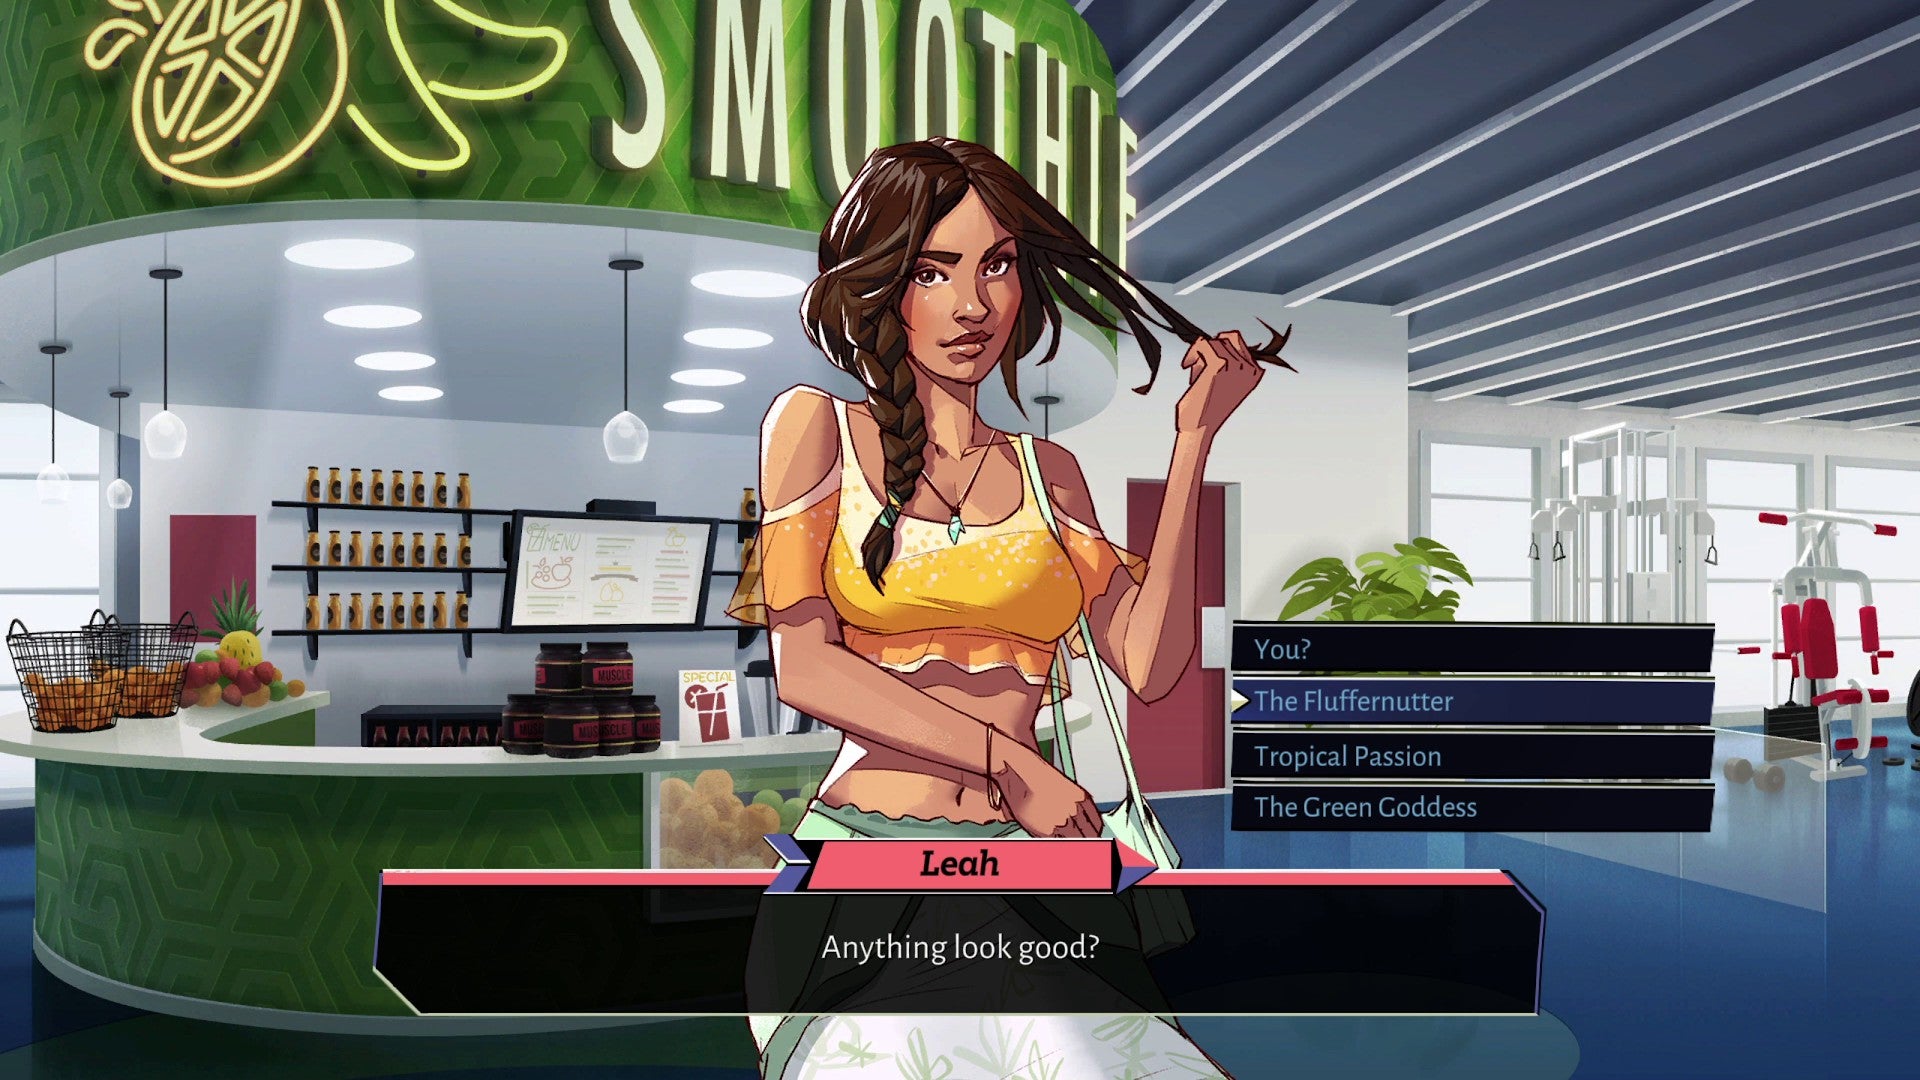 Dating sim dungeon crawler Boyfriend Dungeon adds a new dungeon and three weapons to romance with its free Secrets Weapons update on August 17th, 2022.